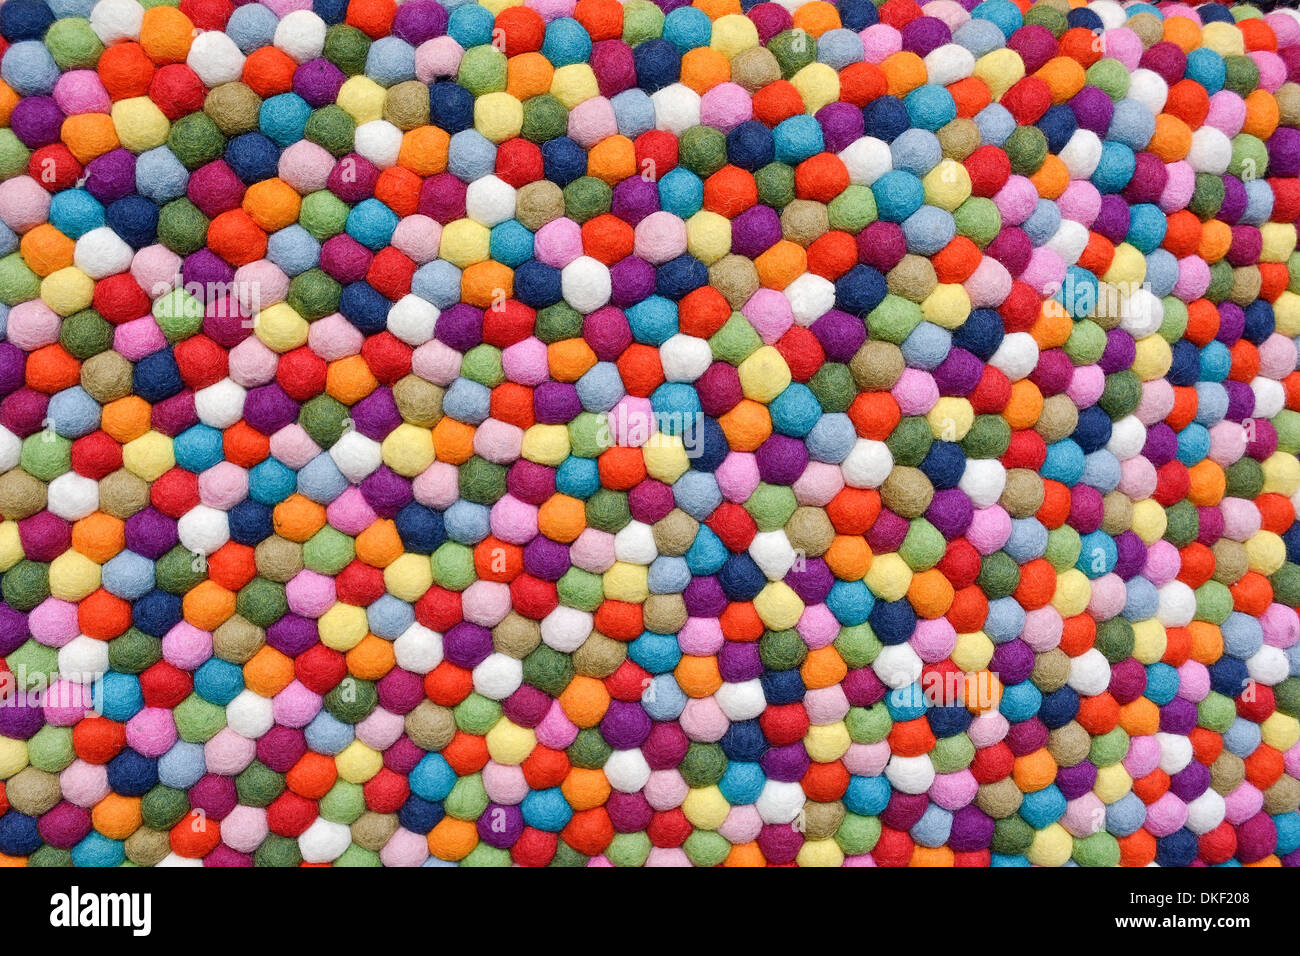 Multicolor Balls of Wool as Design Element Stock Photo